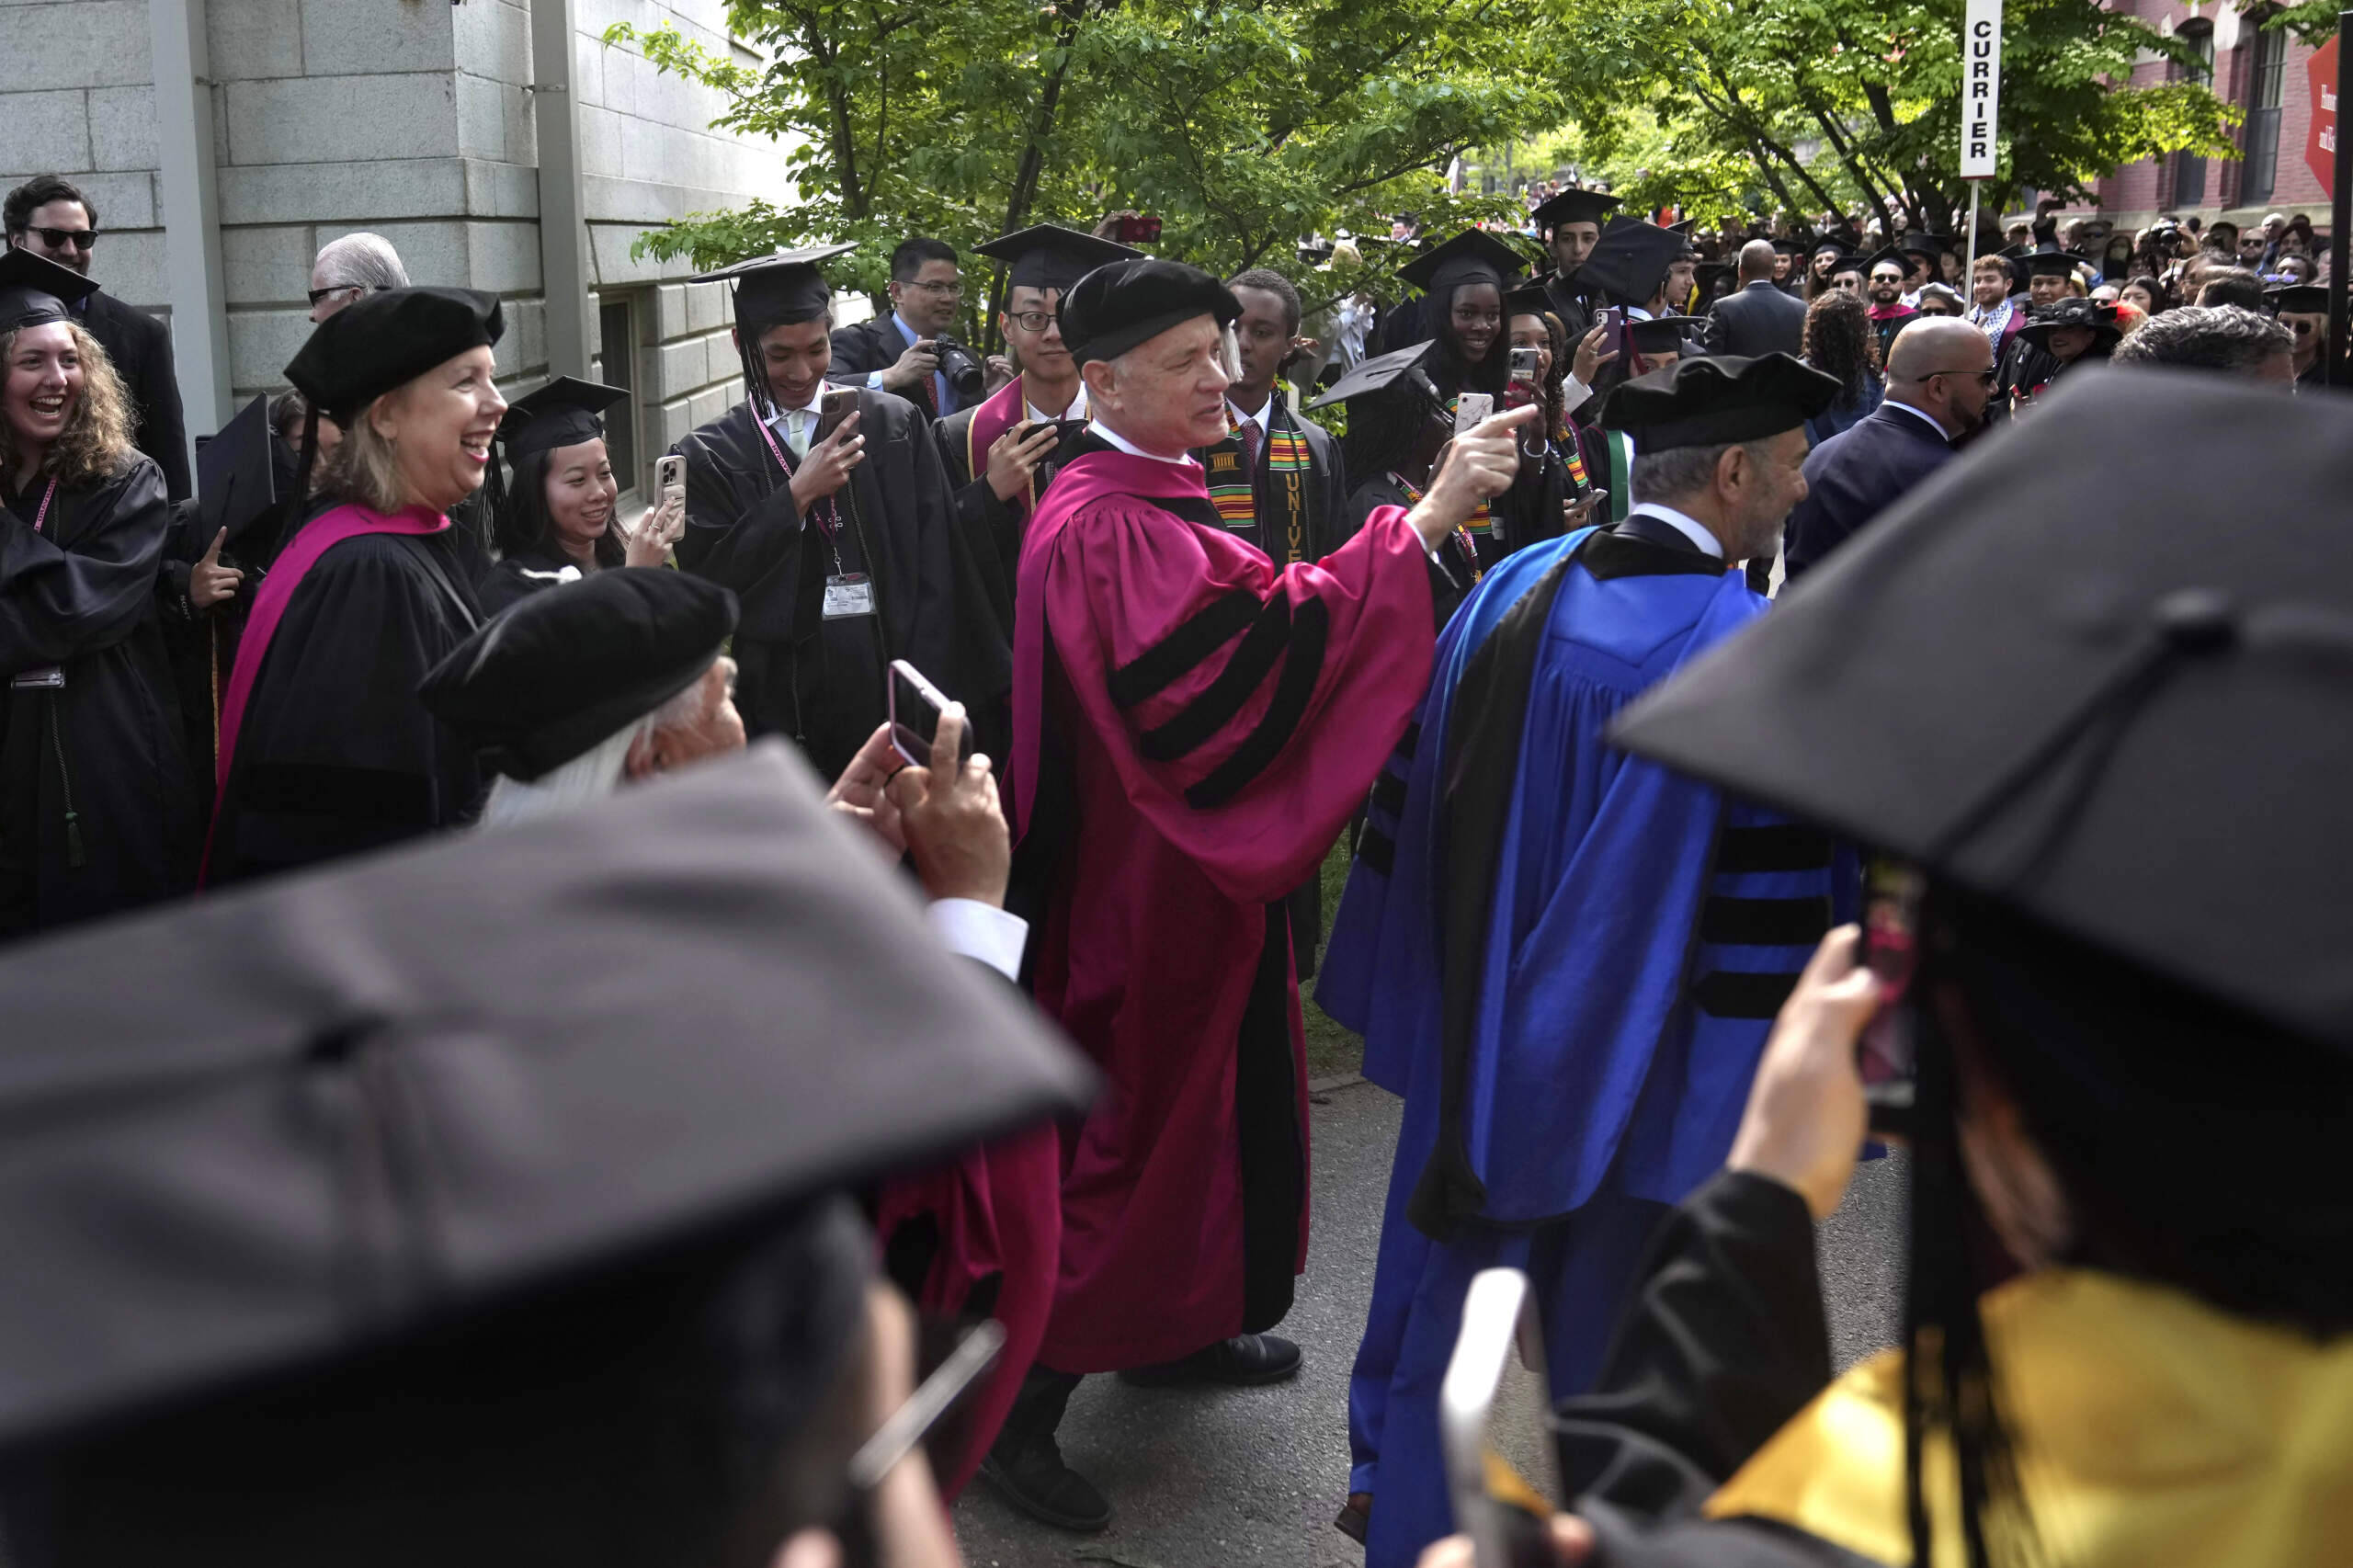 Actor and 2023 Harvard commencement speaker Tom Hanks greets students as he walks in a procession though Harvard Yard. (Steven Senne/AP)